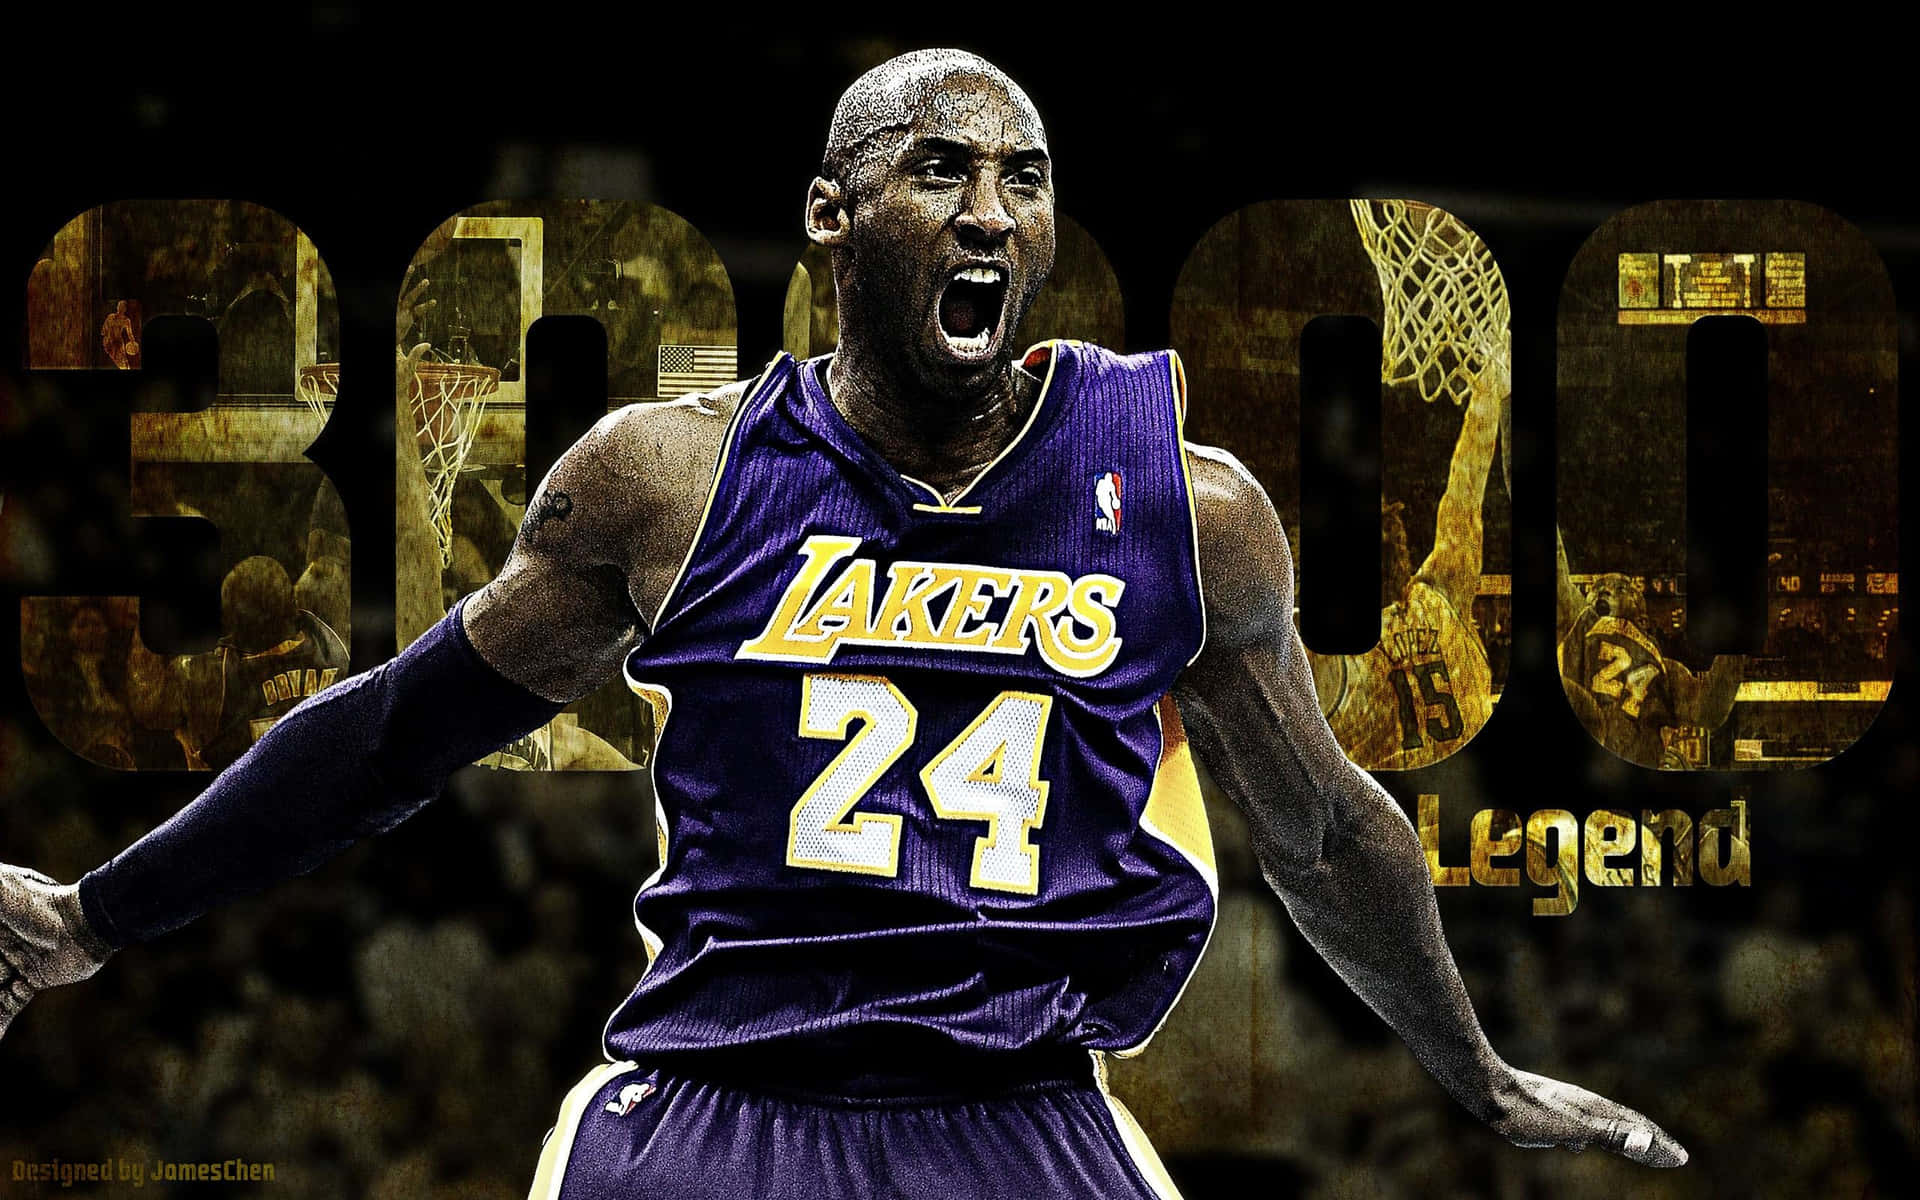 Download Legendary Los Angeles Laker Kobe Bryant In Action On The Court Wallpaper